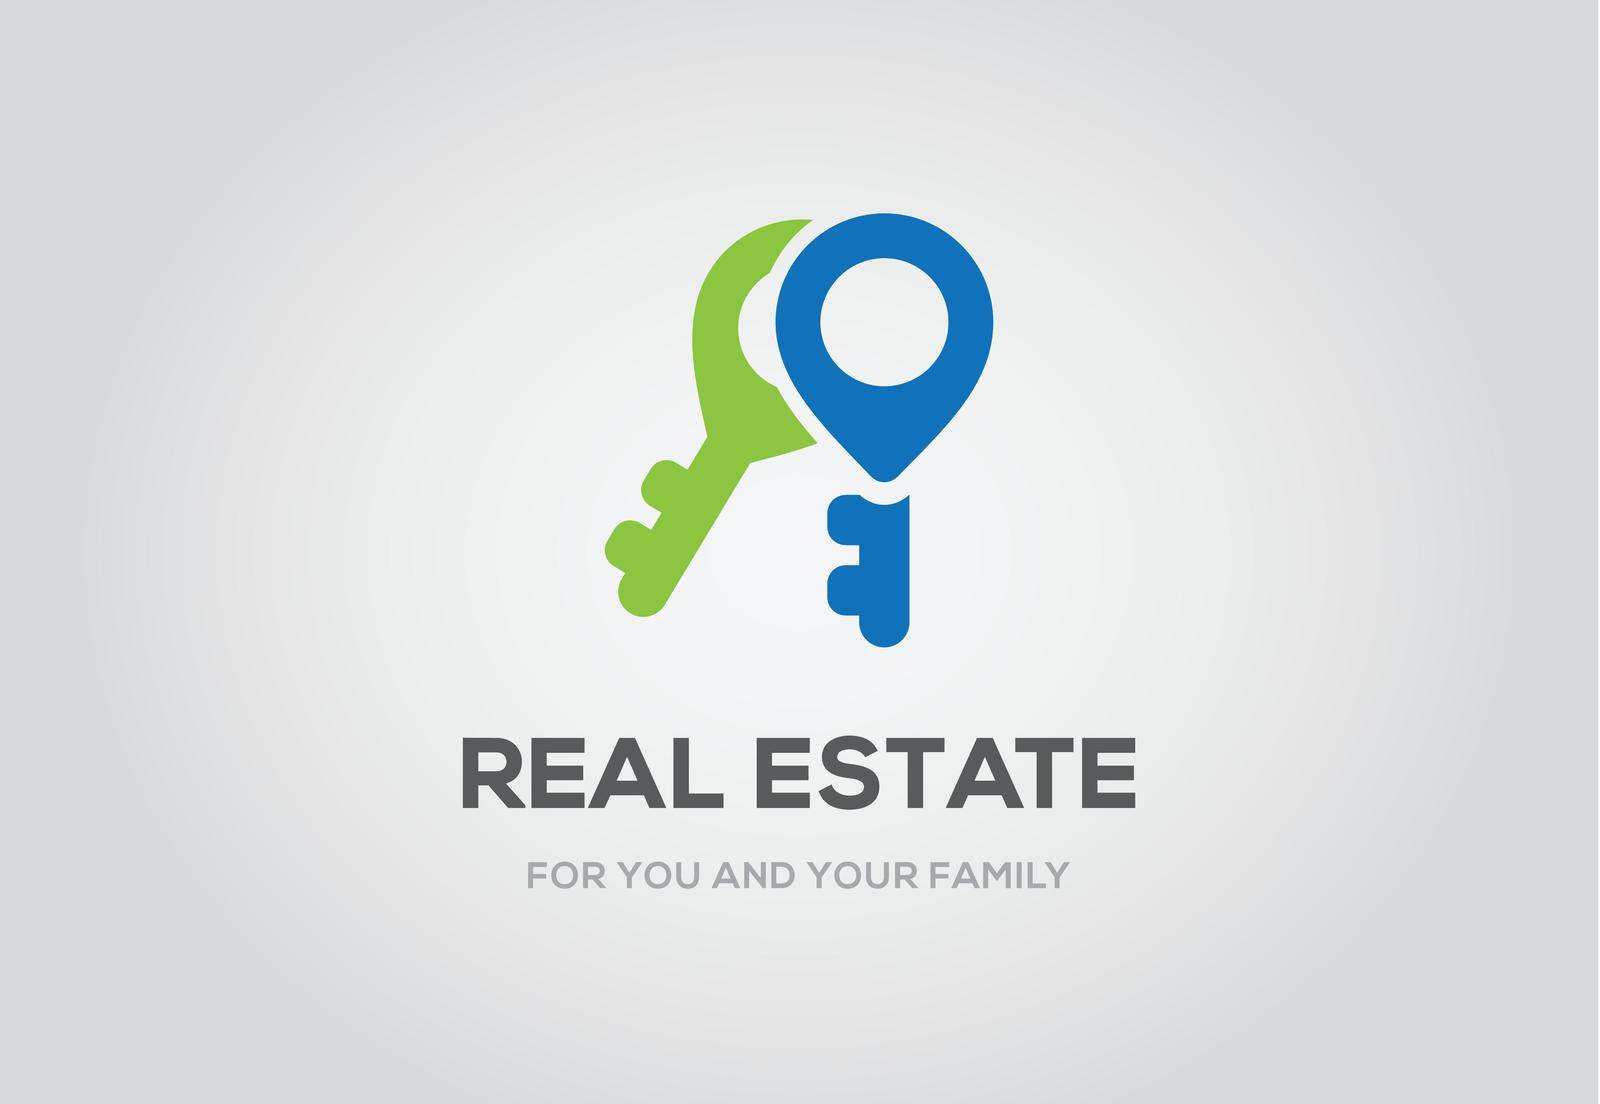 Template logo for real estate agency or cottage town elite class. Real estate logo.